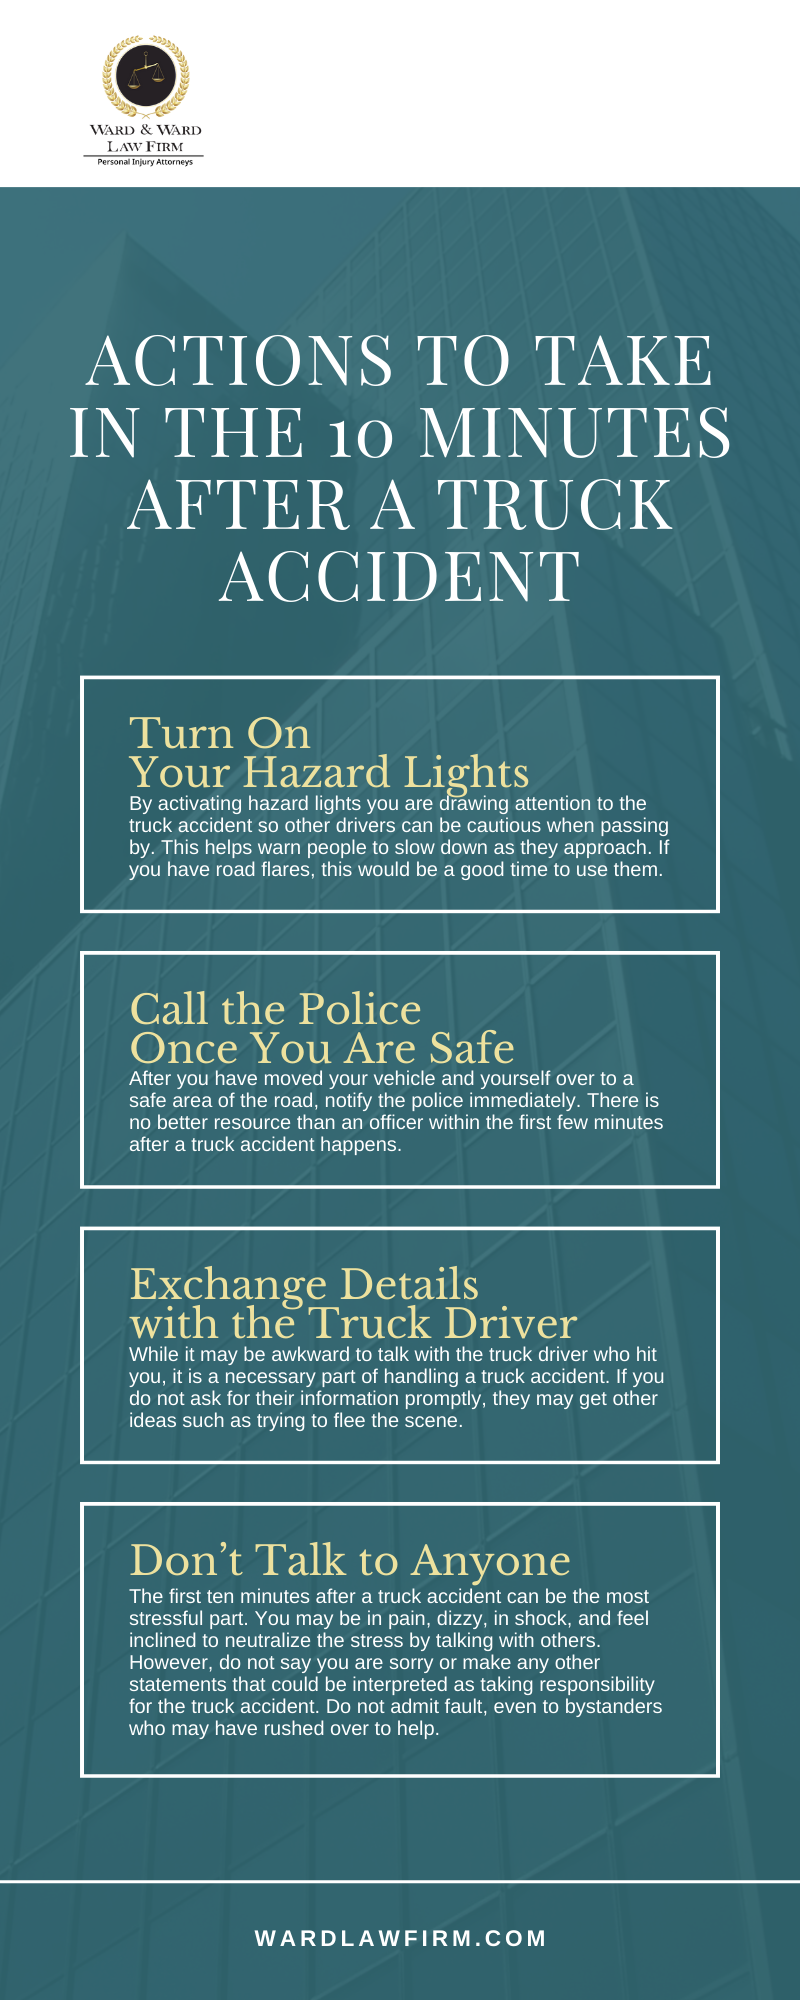 Actions To Take In The 10 Minutes After A Truck Accident Infographic